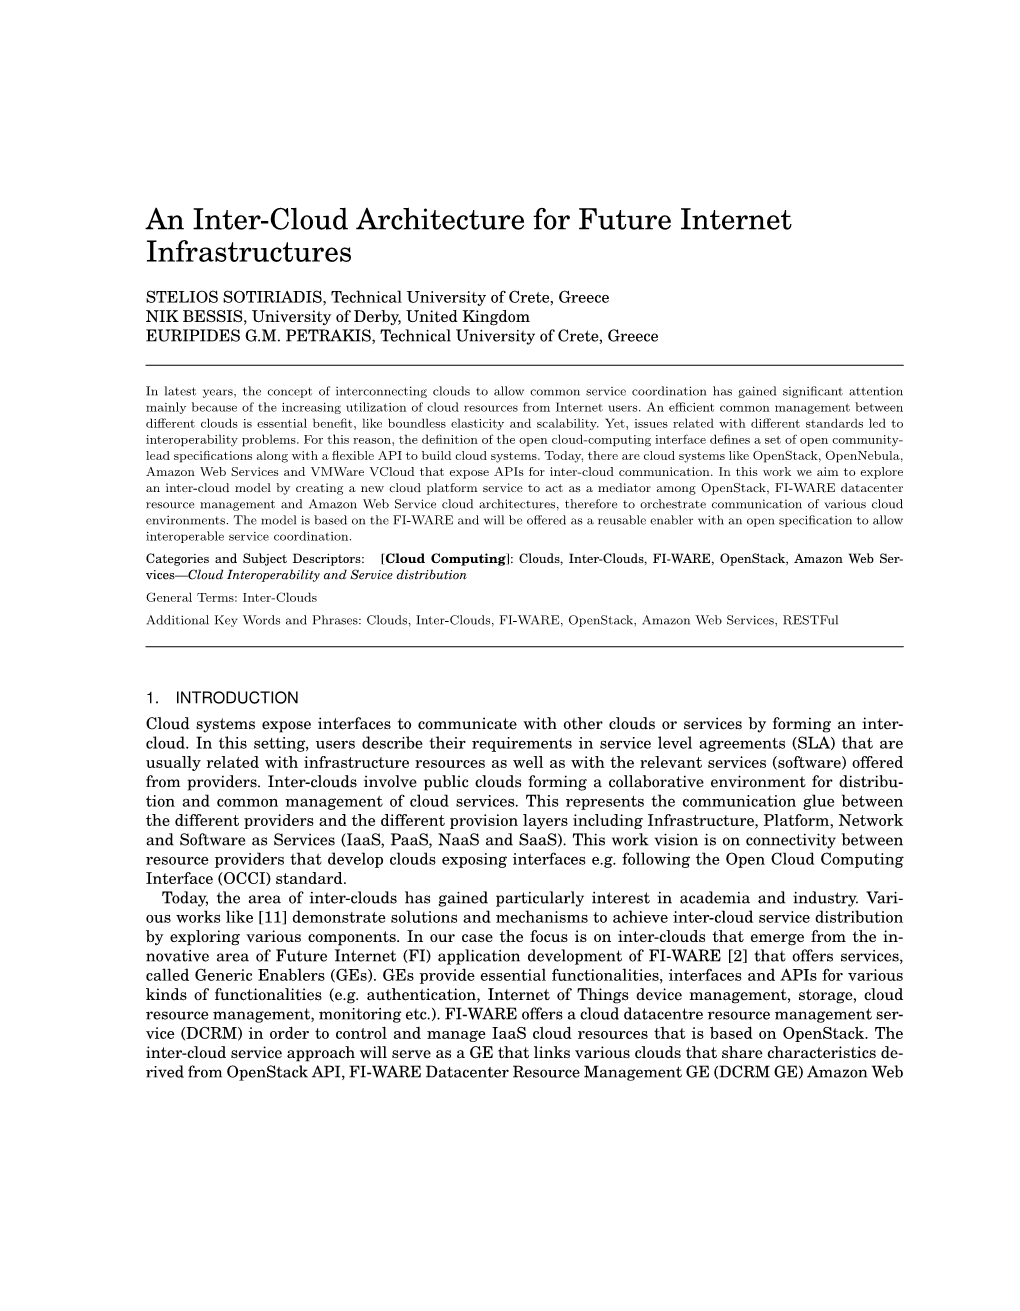 An Inter-Cloud Architecture for Future Internet Infrastructures